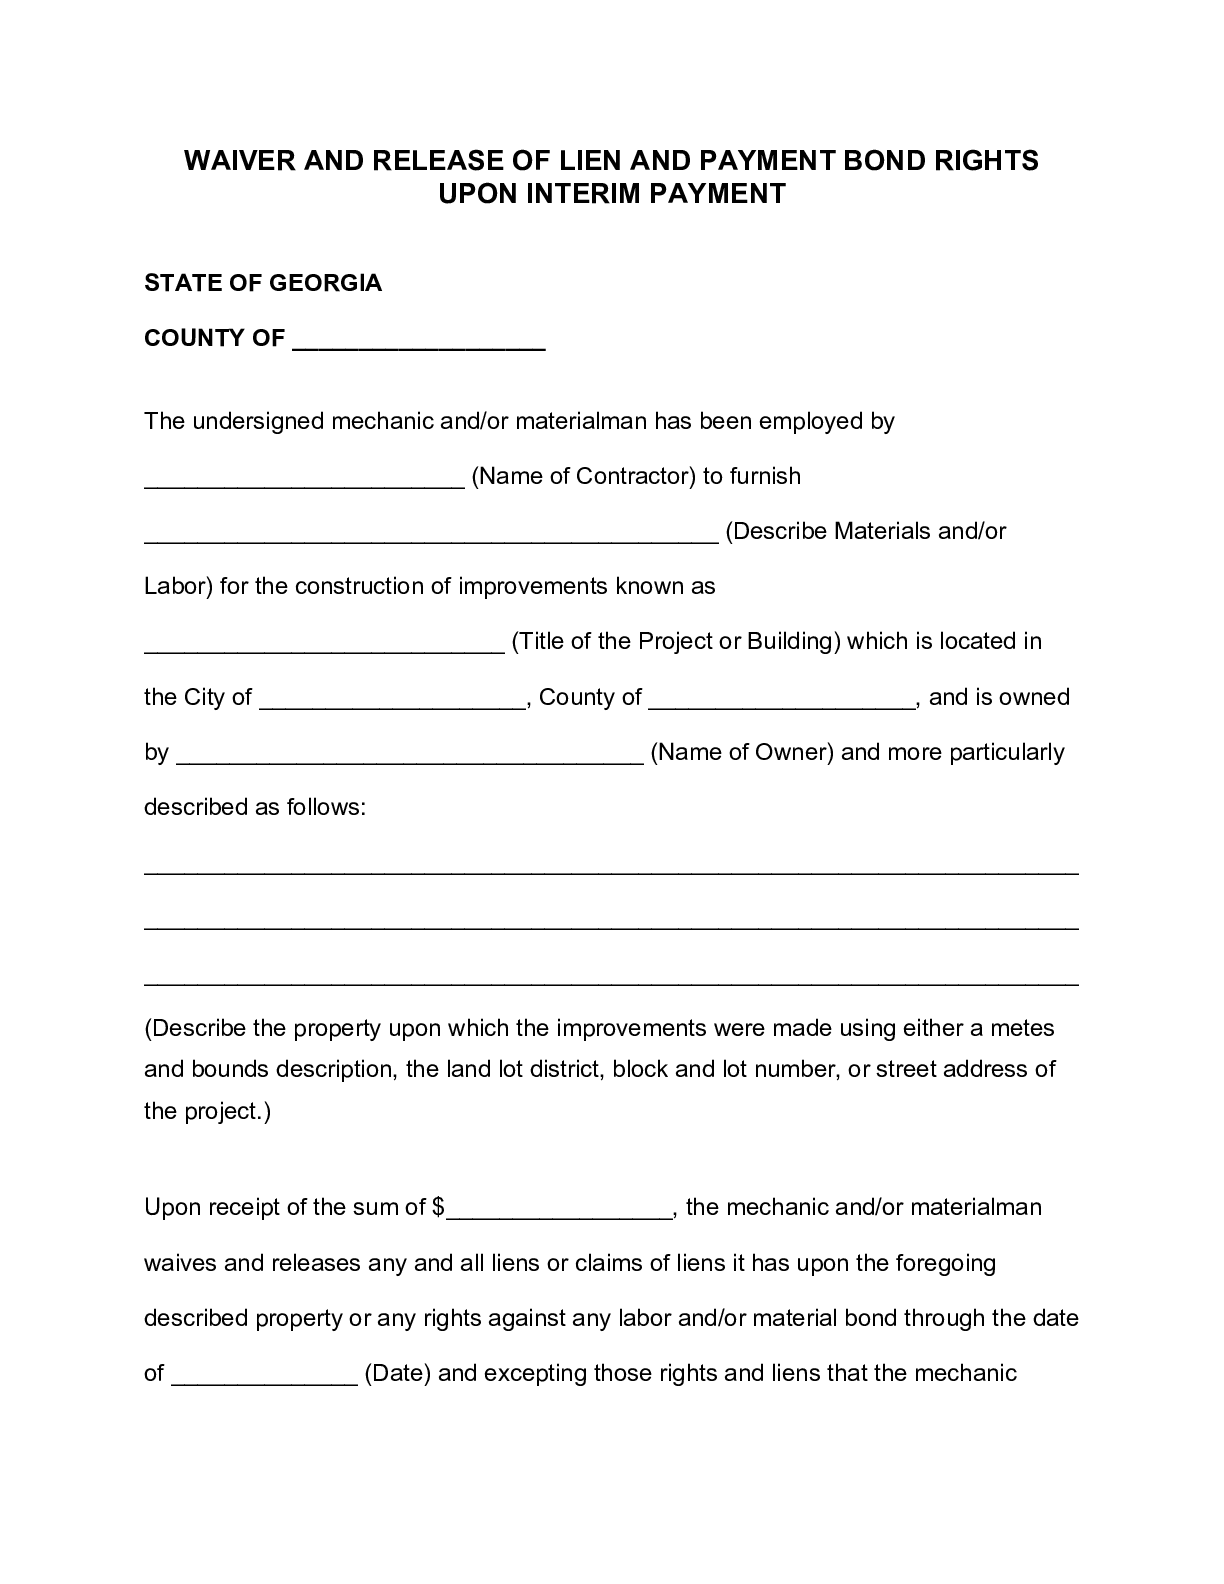 Georgia Interim Lien Waiver Form | Free Template Download - free from